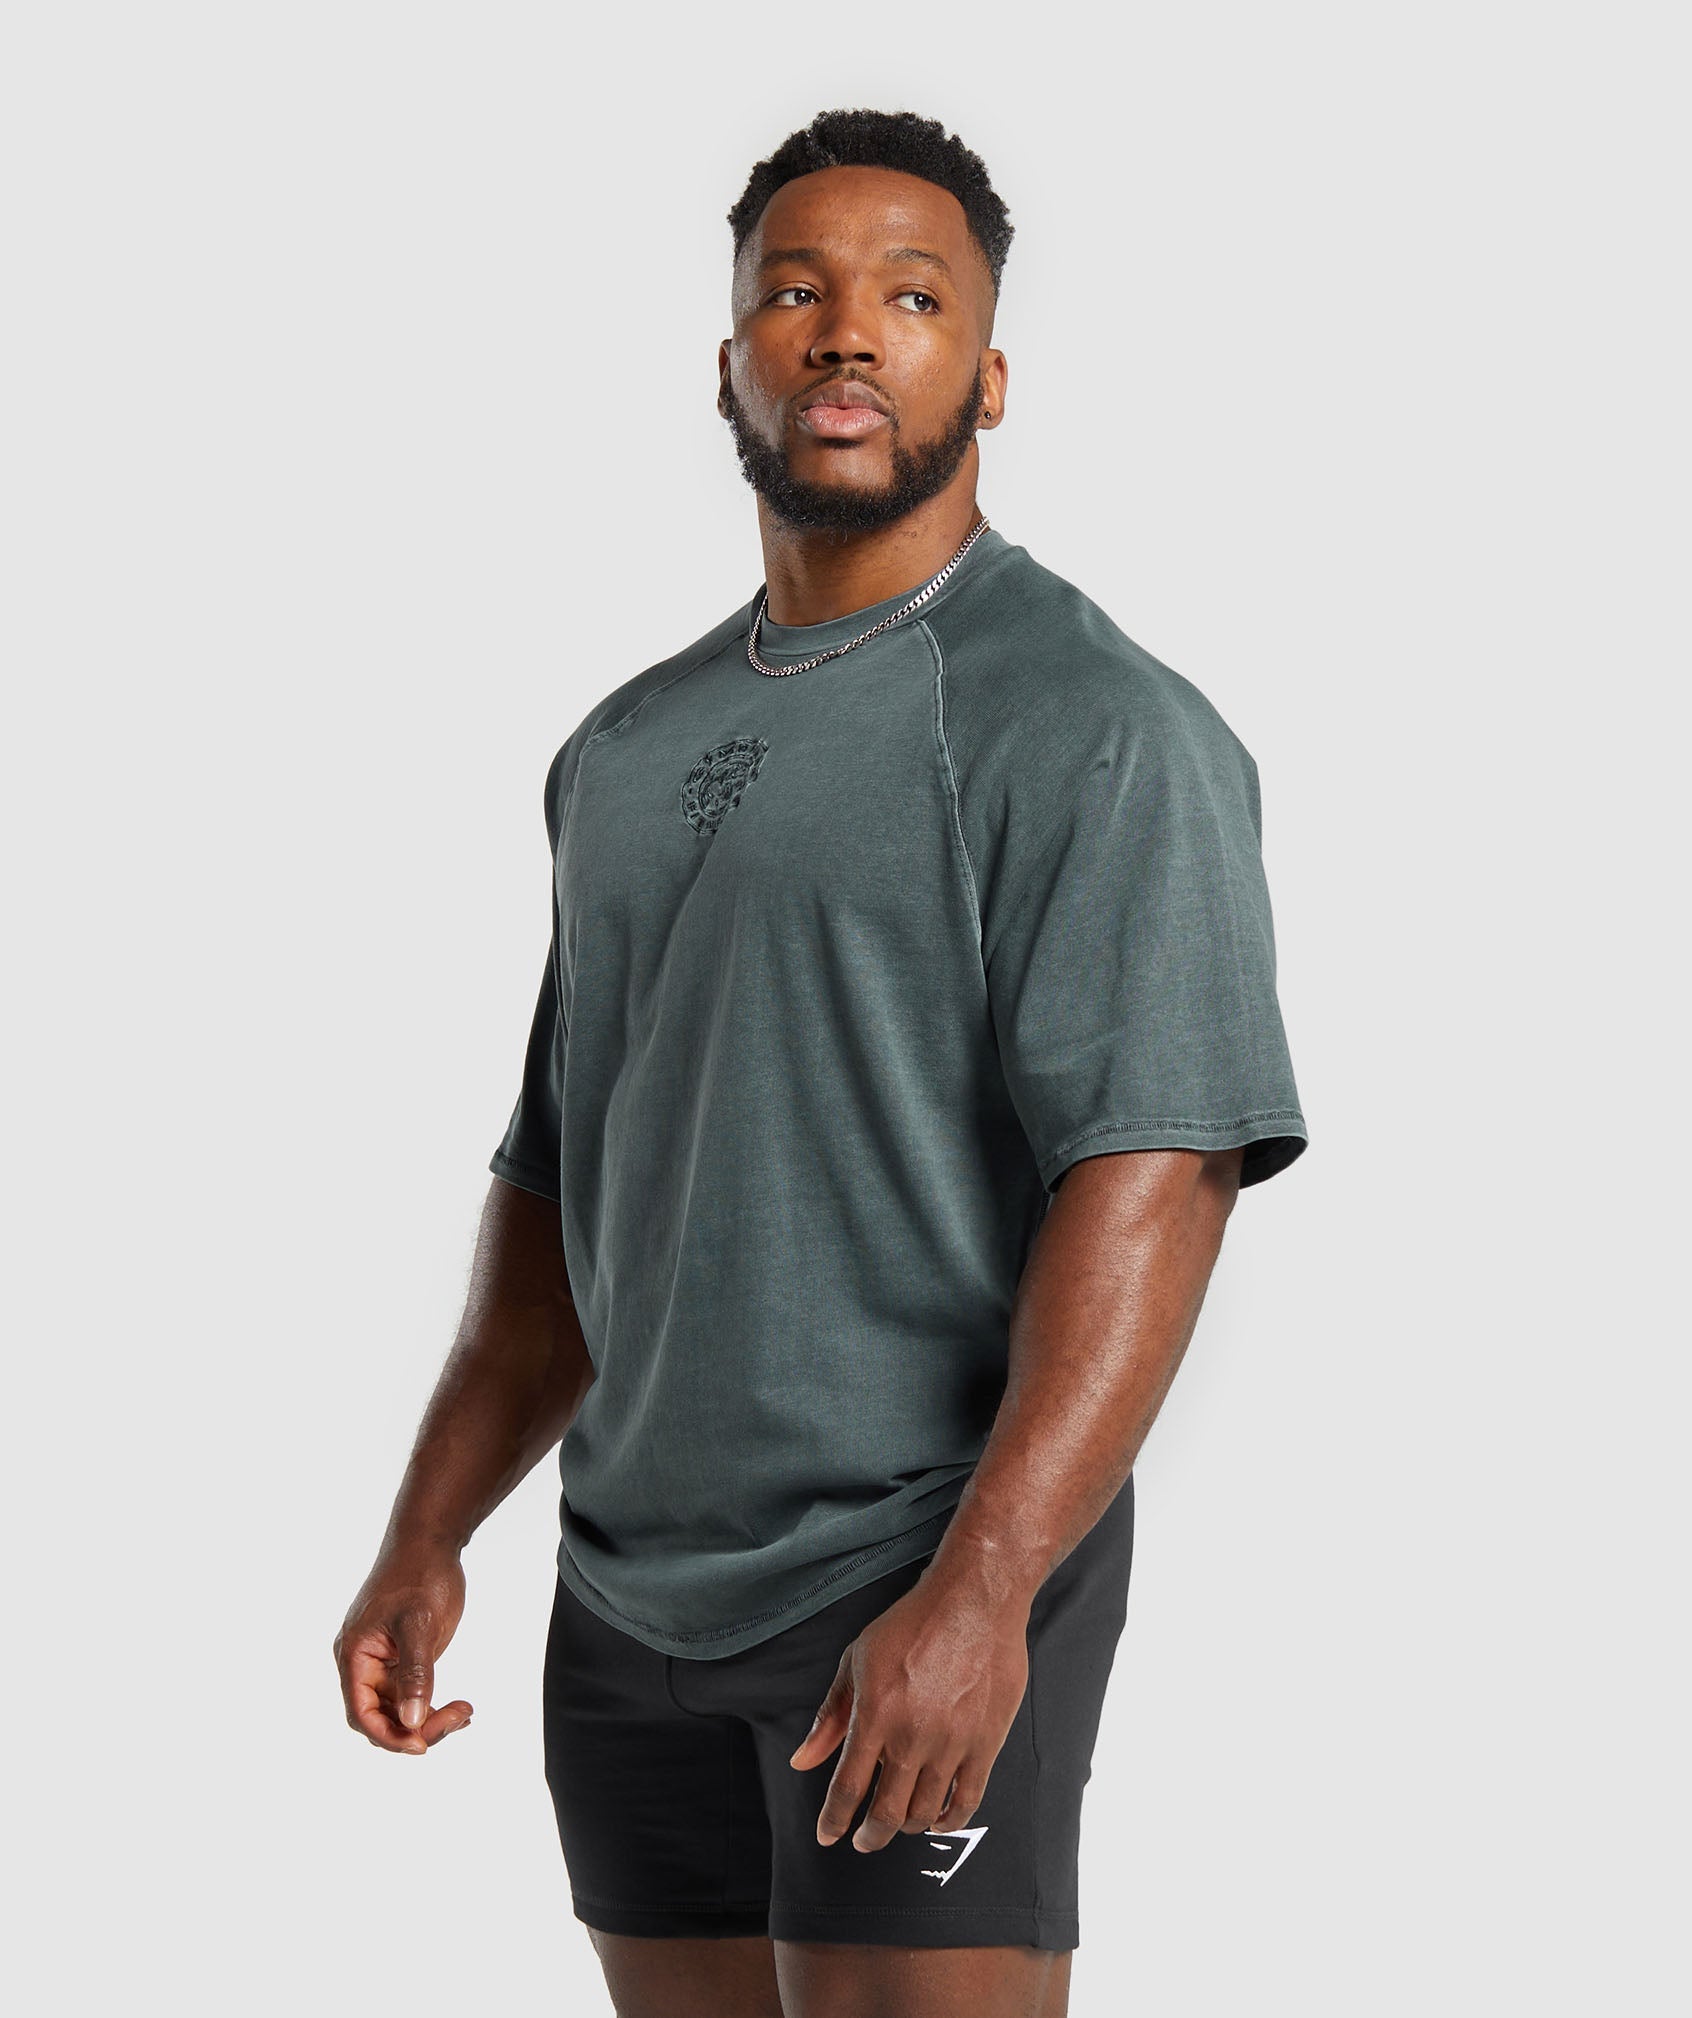 Premium Legacy T-Shirt in Cargo Teal - view 3